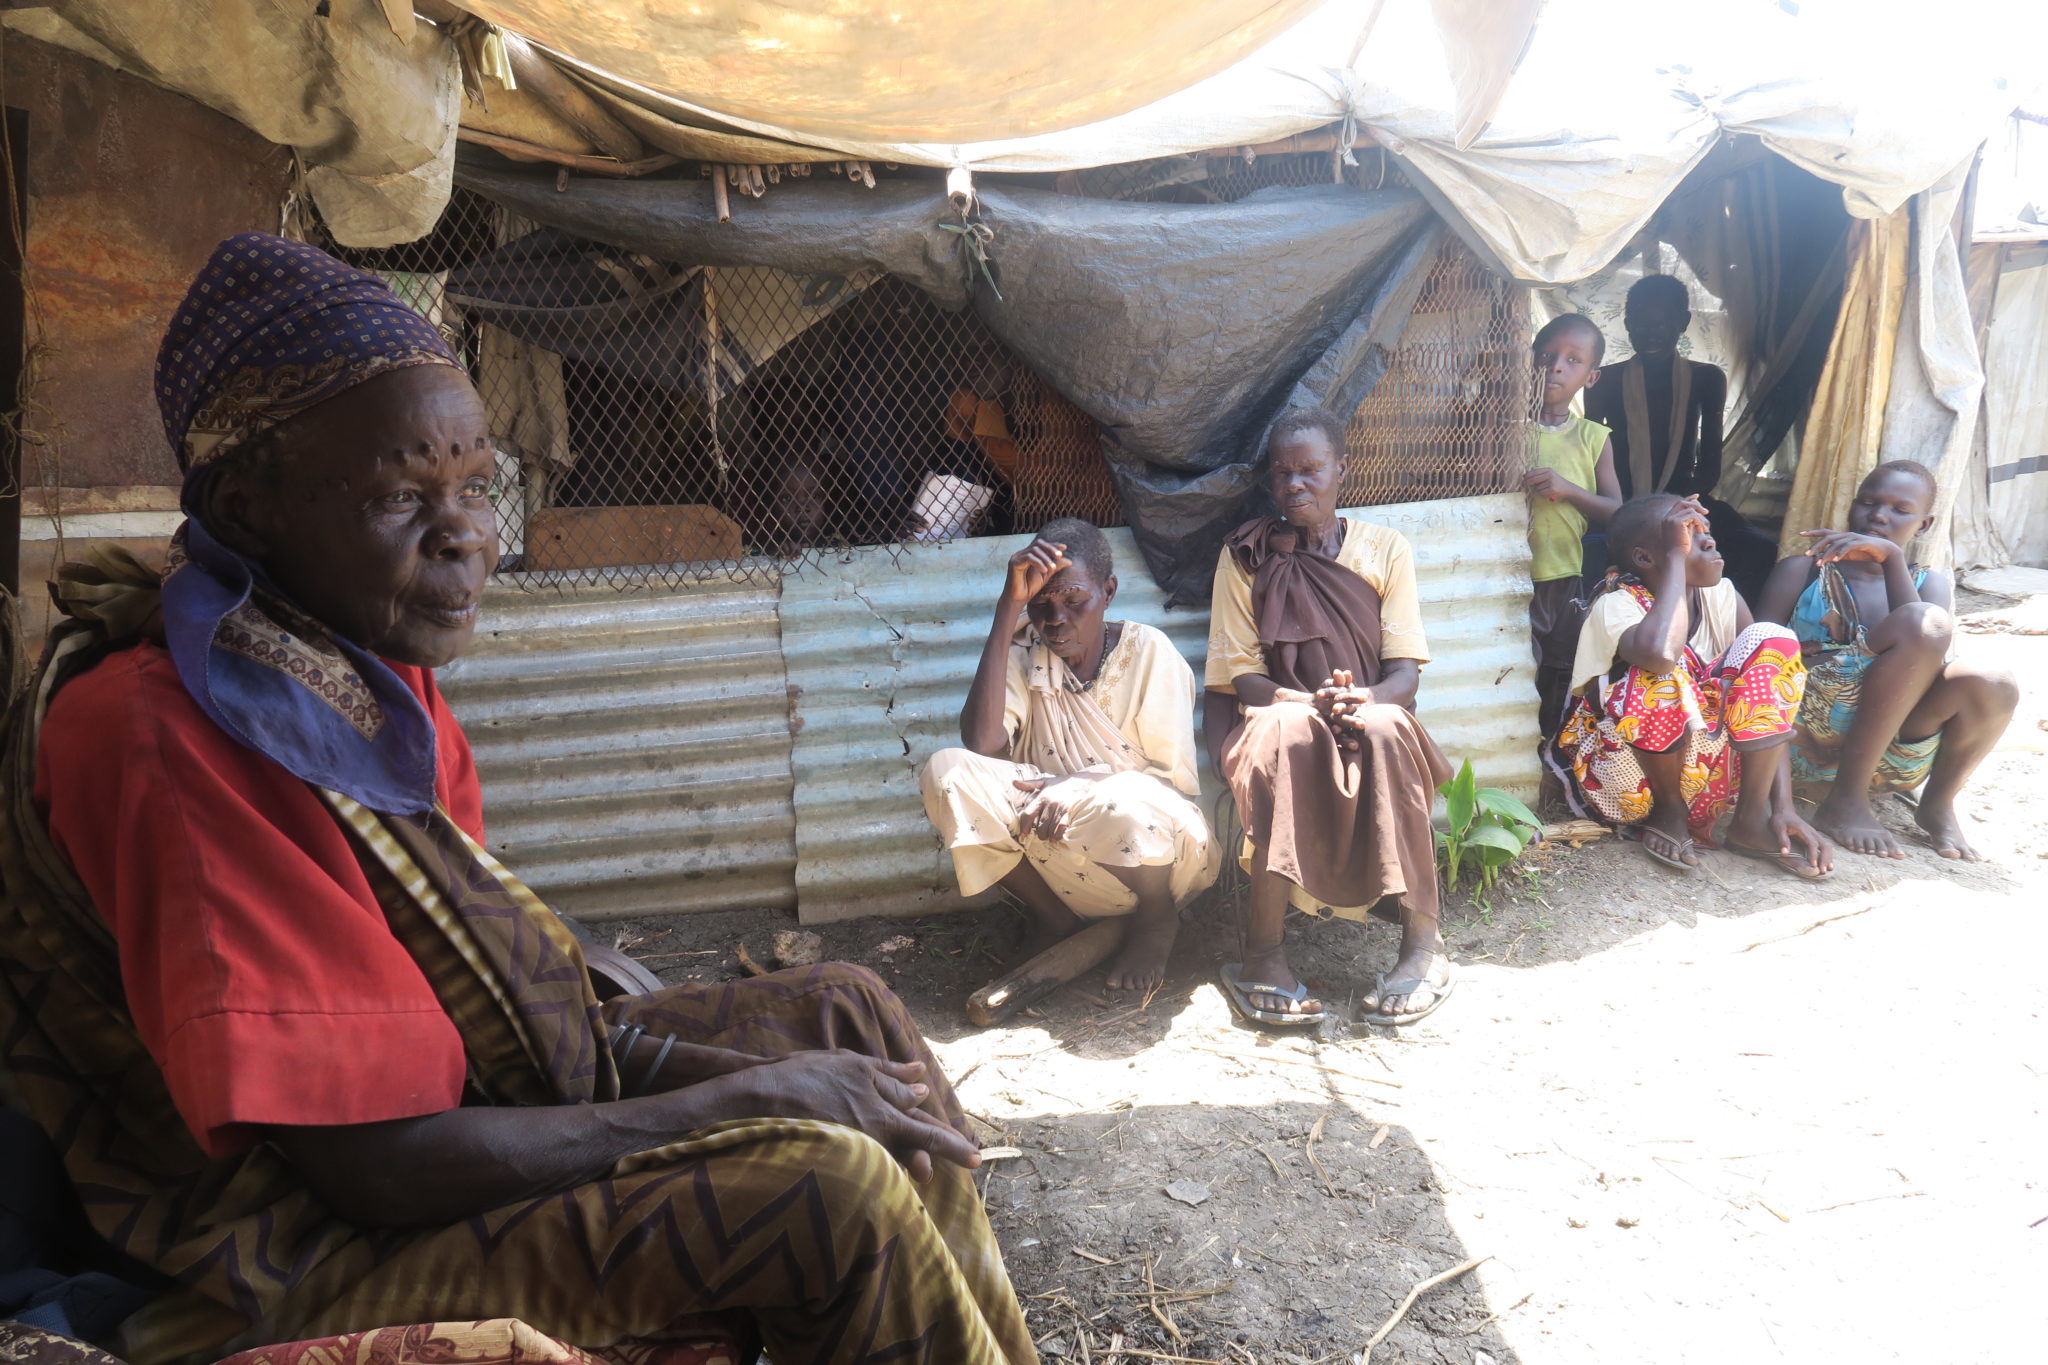 South Sudan – “It was as if my village was swept by a flood” – mass displacement of the Shilluk population from the west bank of the White Nile